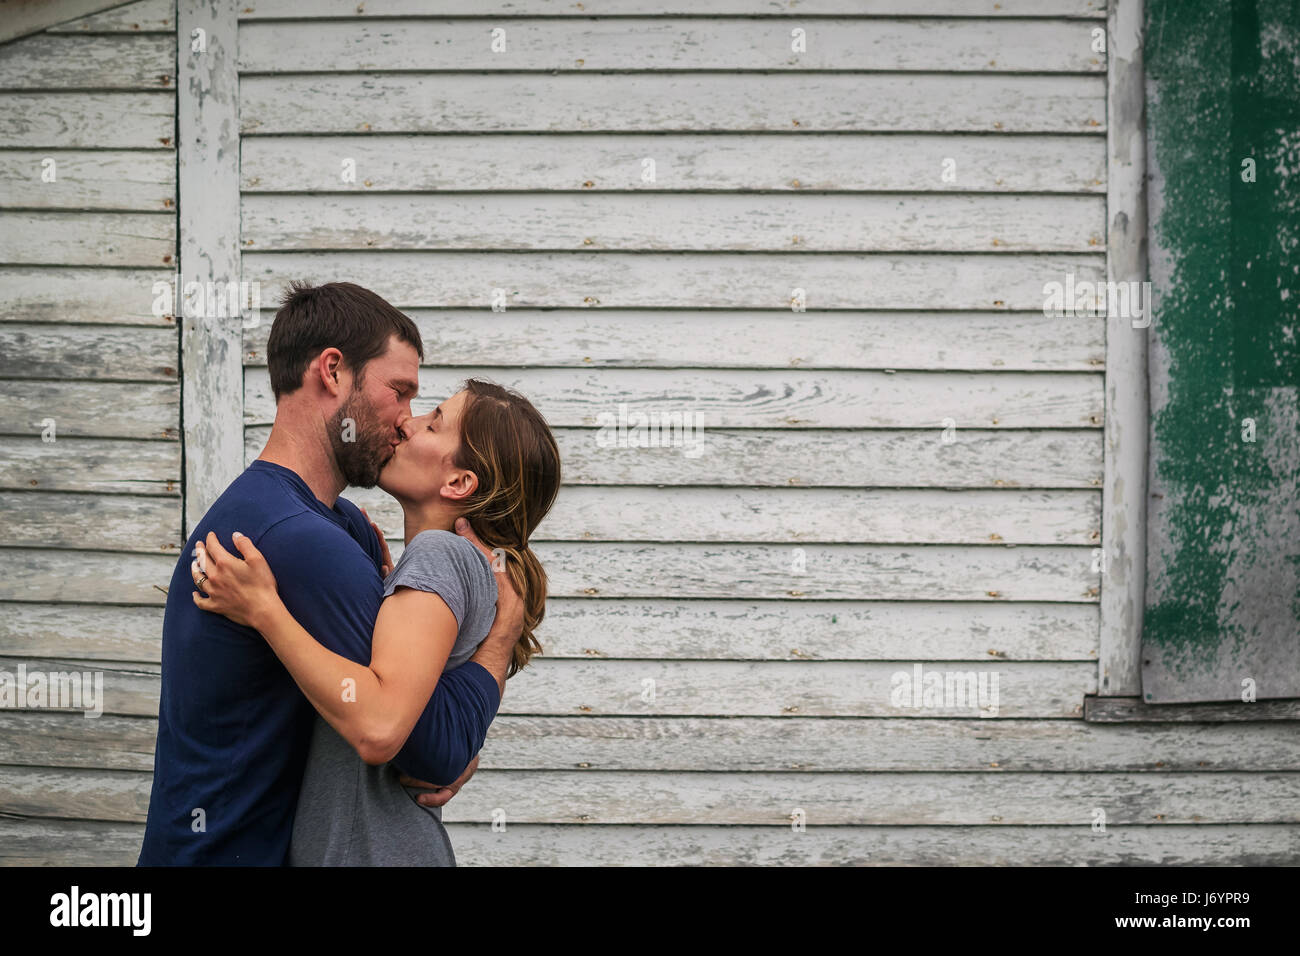 A man and woman kissing Stock Photo